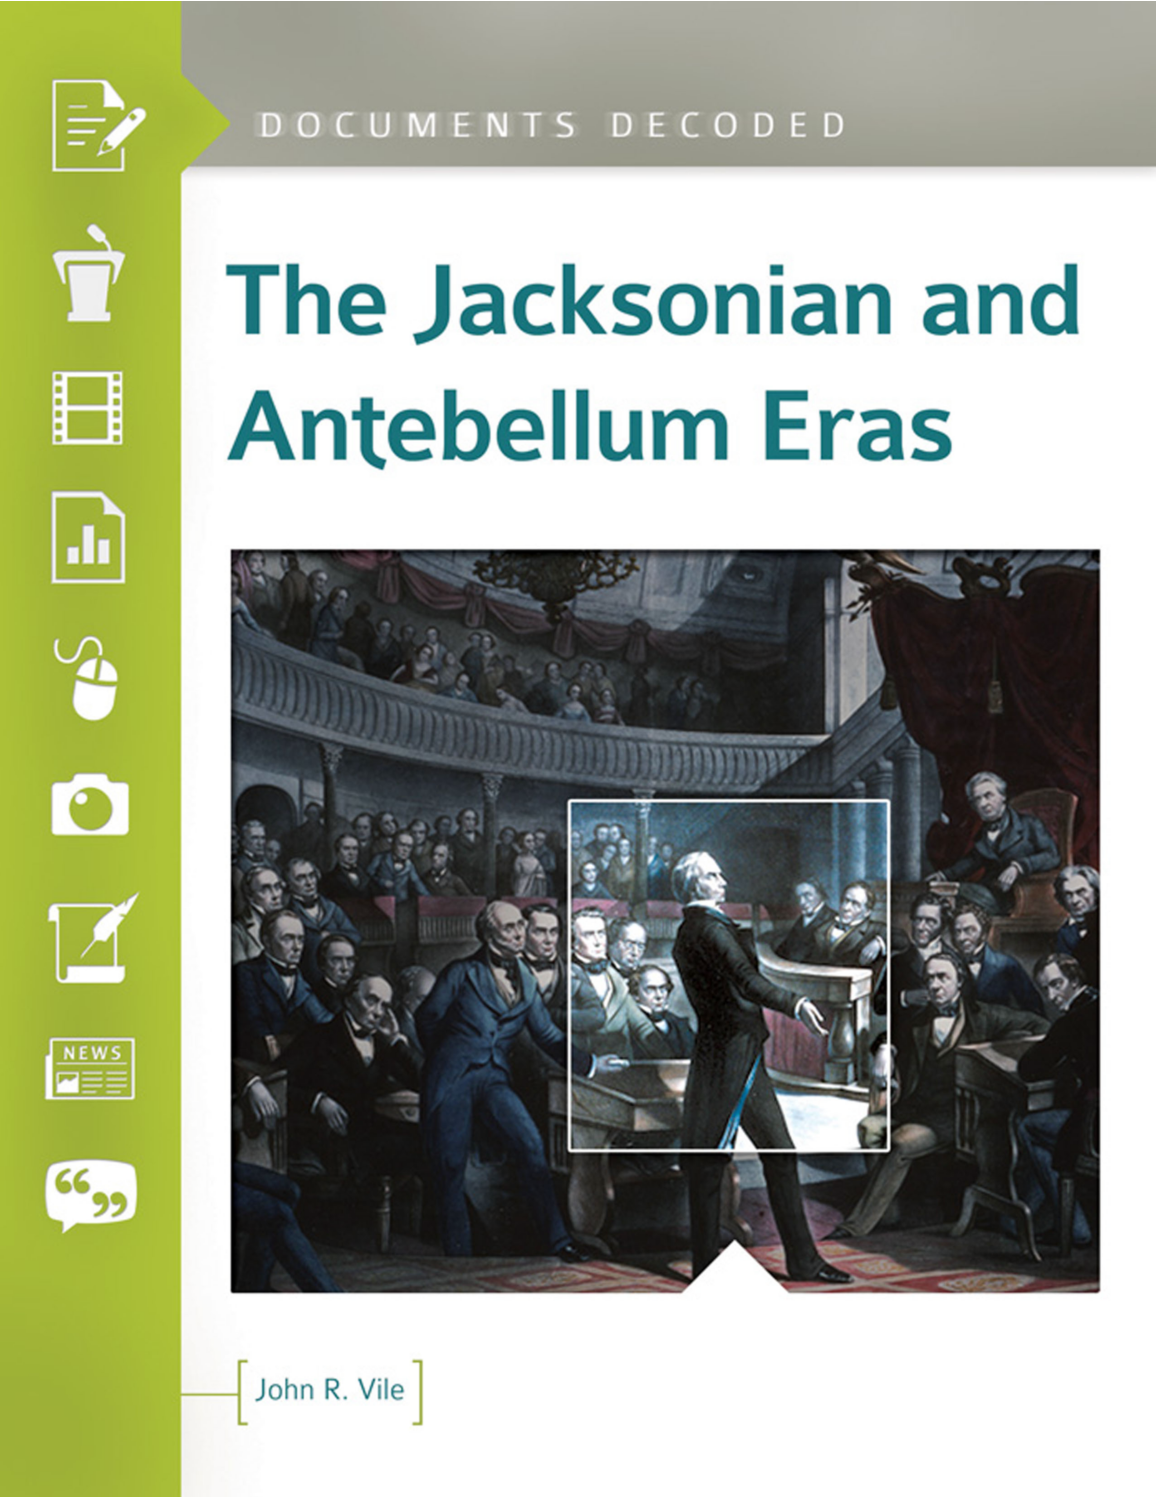 The Jacksonian and Antebellum Eras: Documents Decoded page Cover1